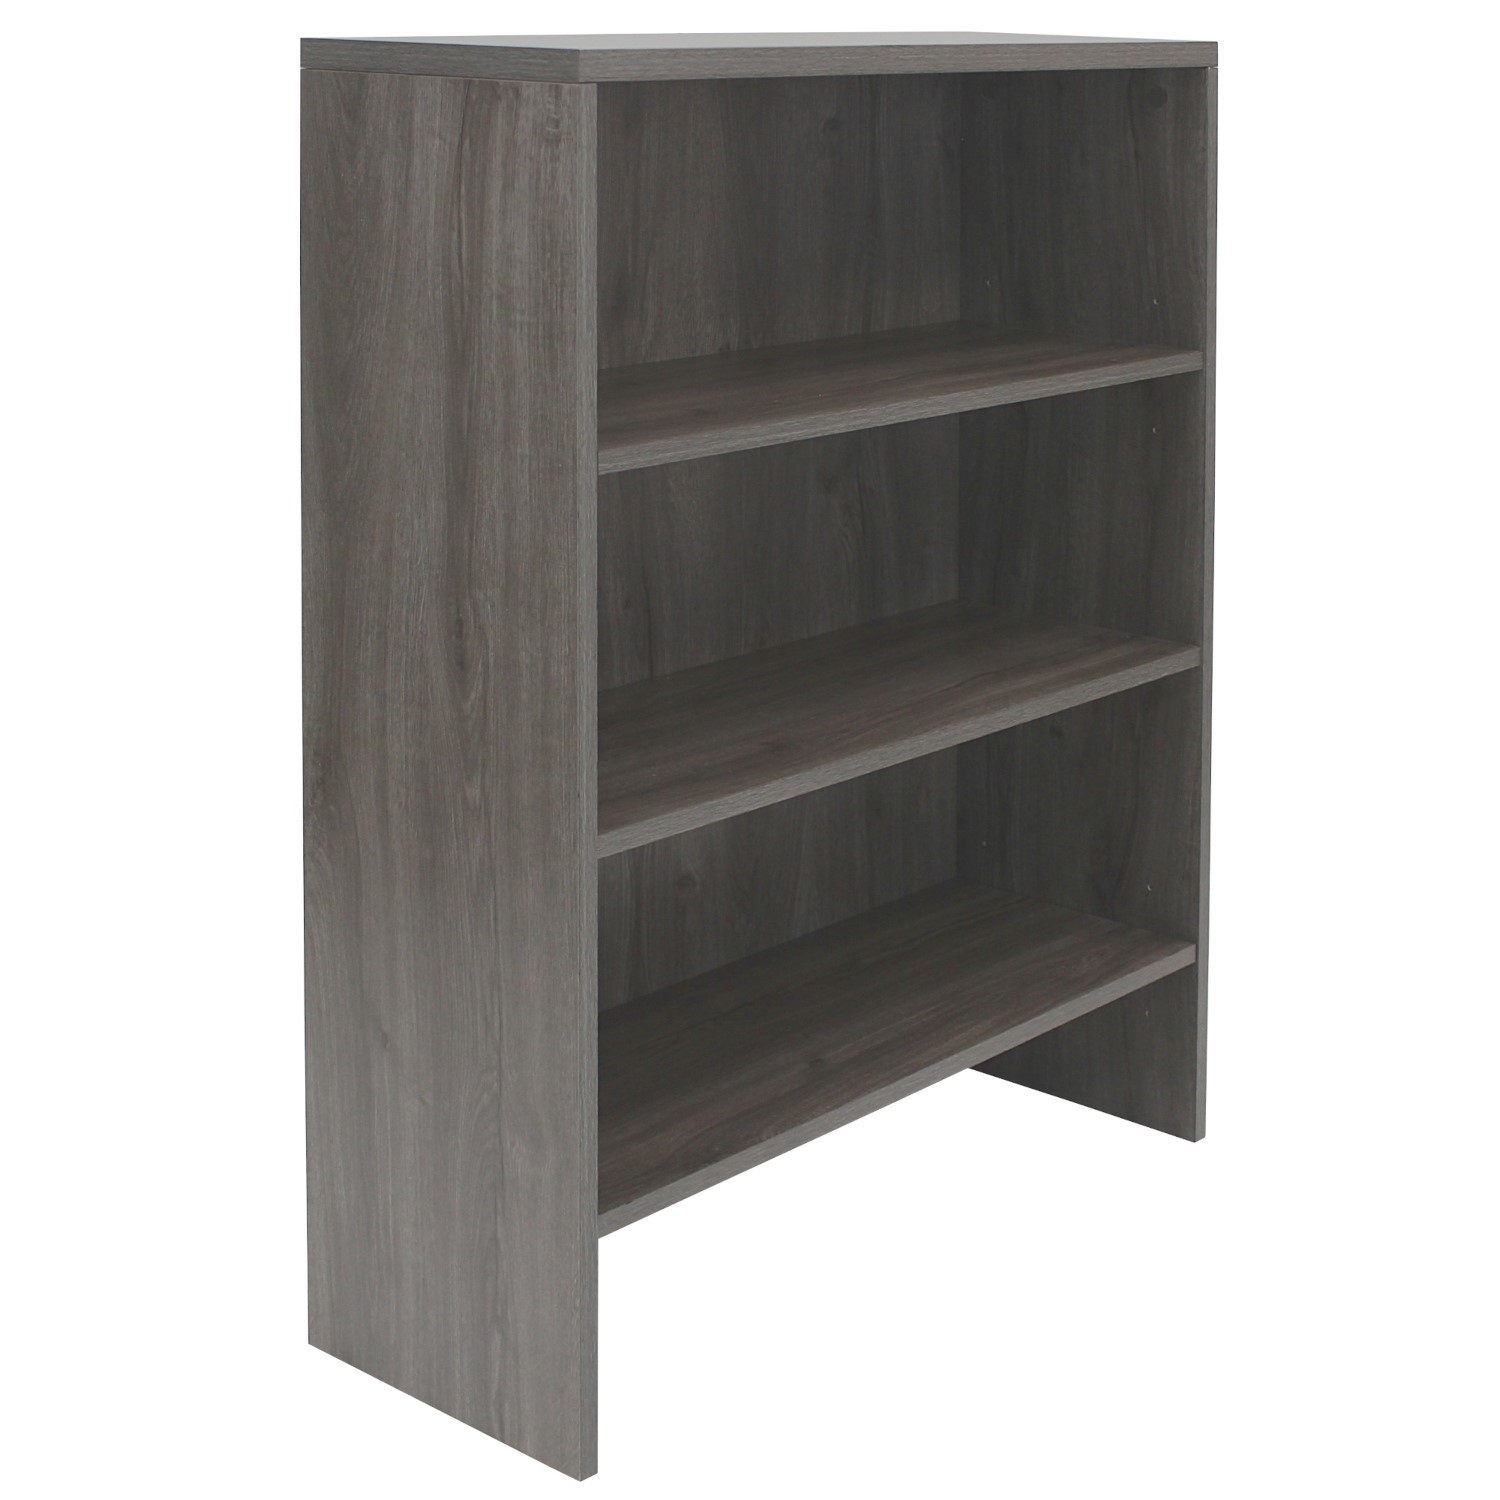 Read more about Wide dark grey wall mounted bookcase denver